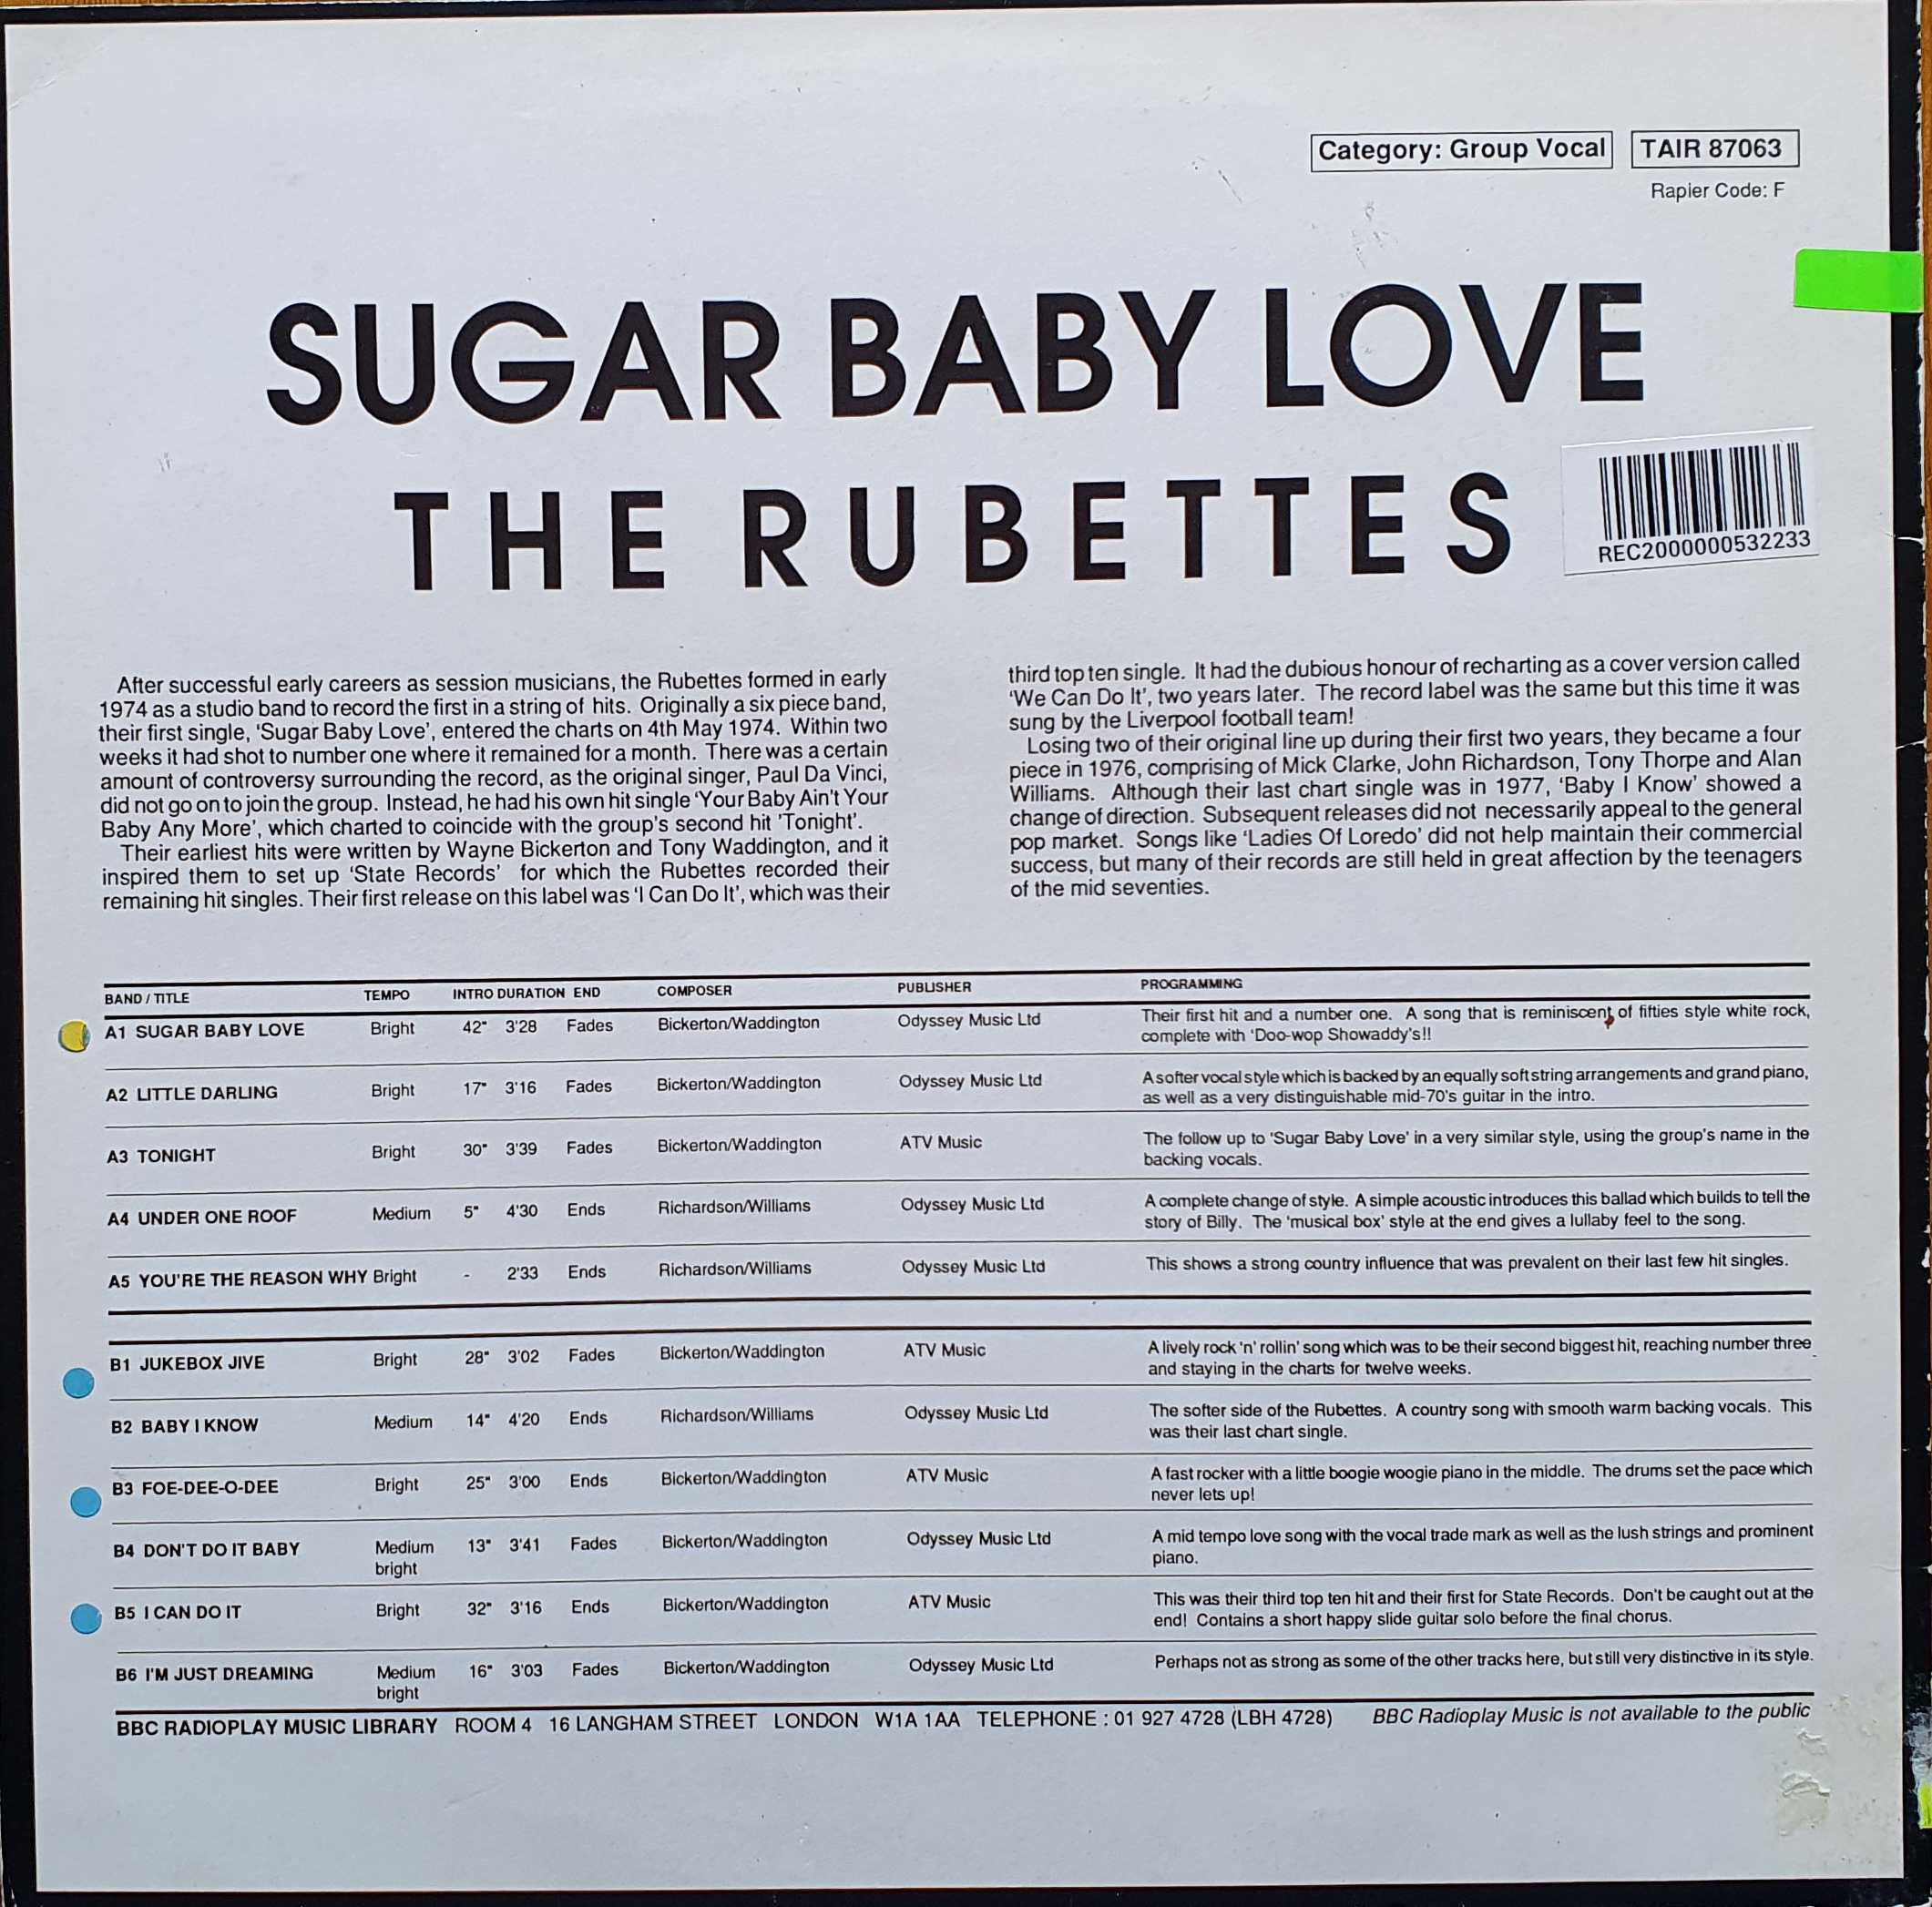 Picture of TAIR 87063 Sugar baby love by artist The Rubettes from the BBC records and Tapes library